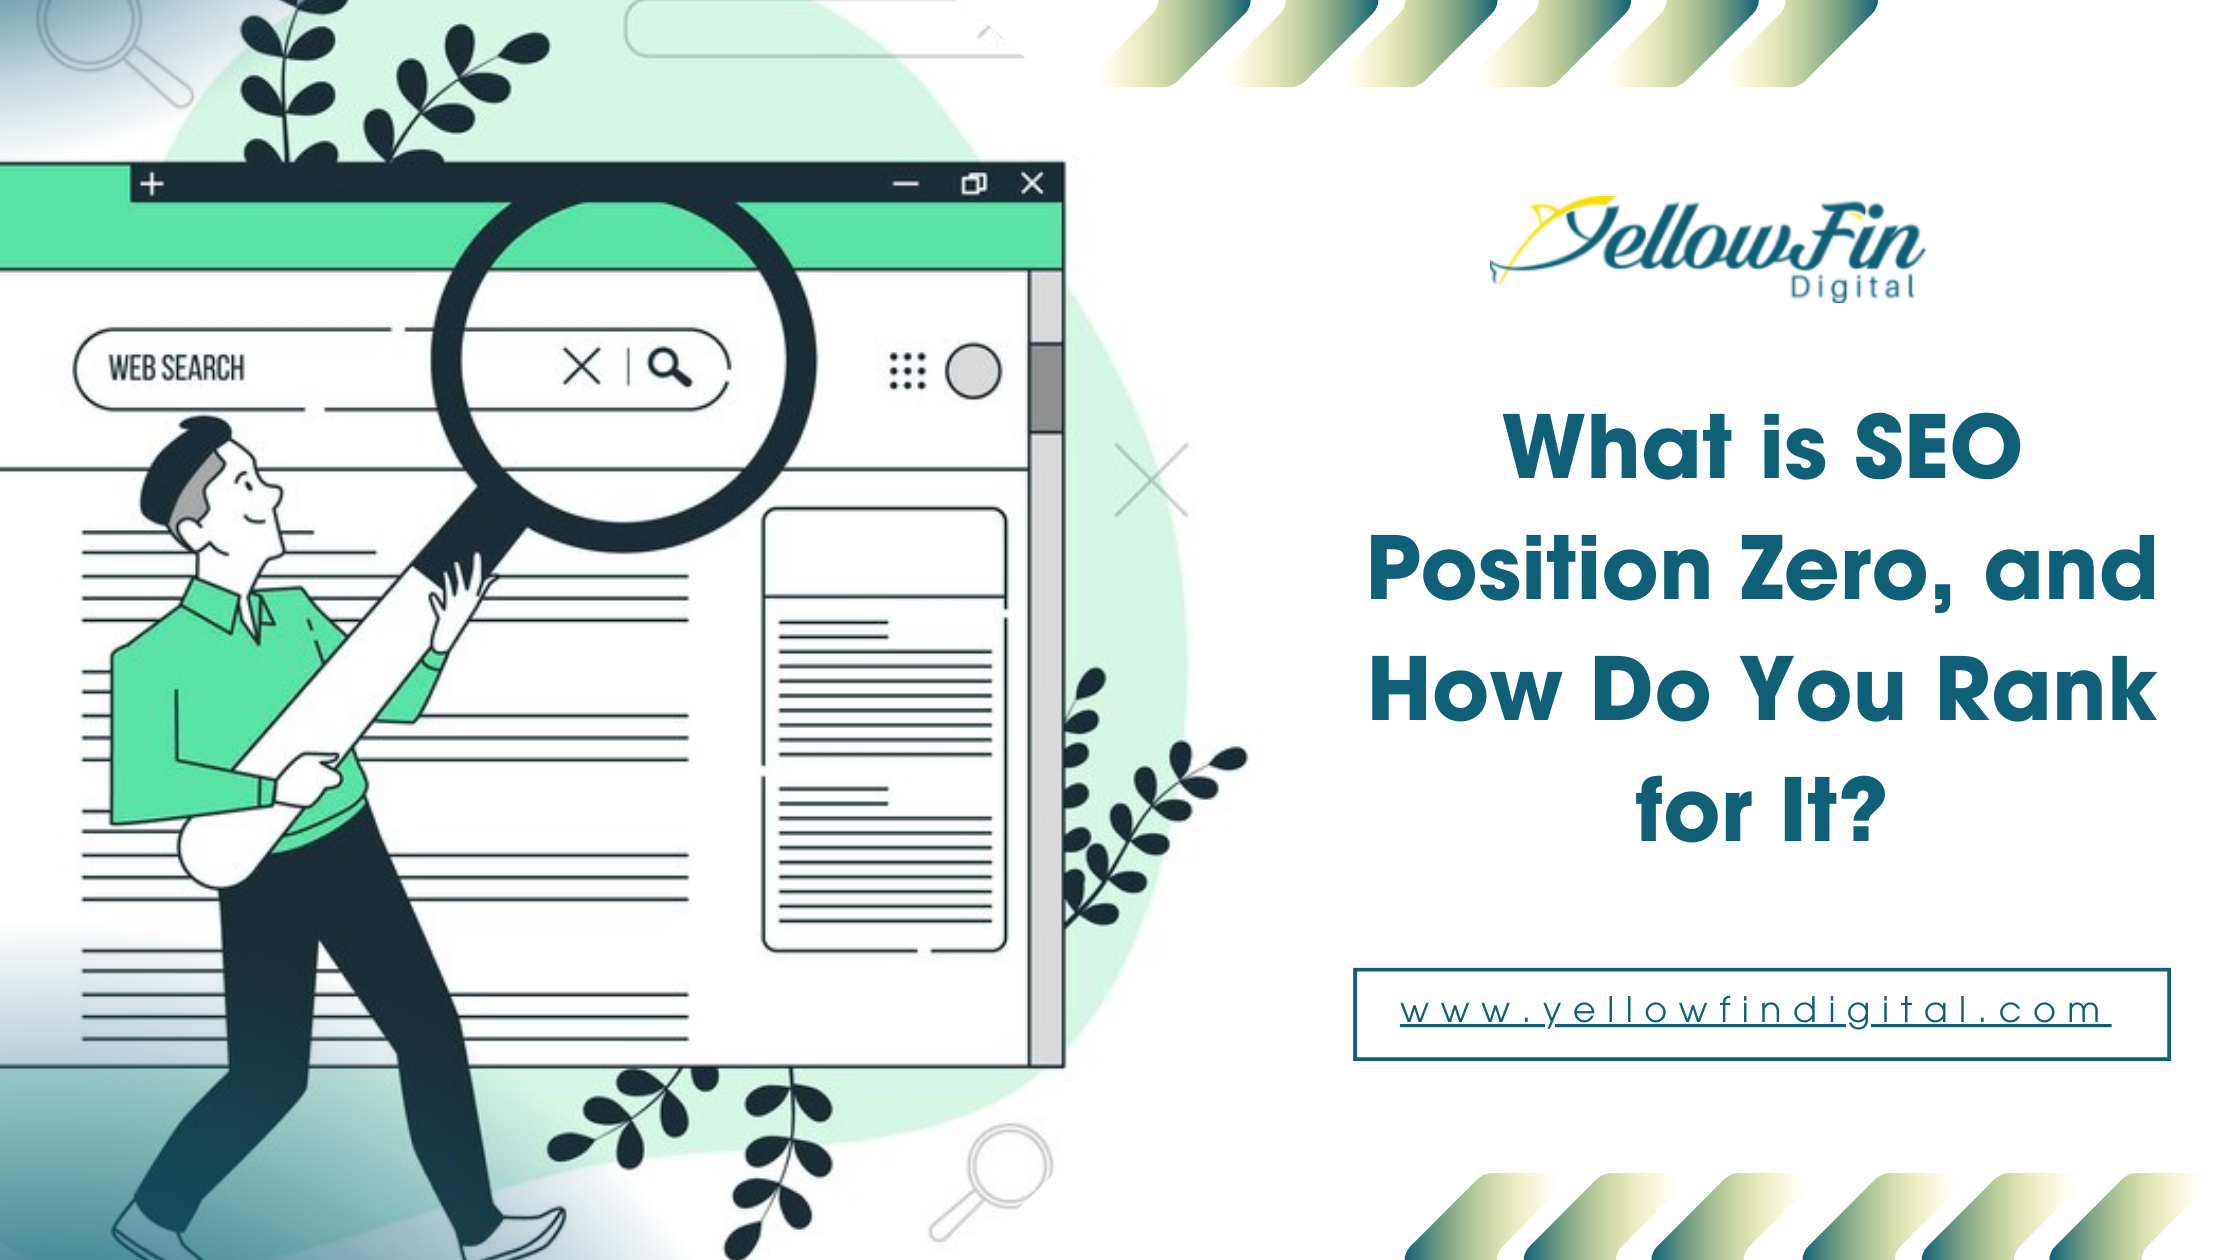 What is SEO Position Zero, and How Do You Rank for It? - AtoAllinks